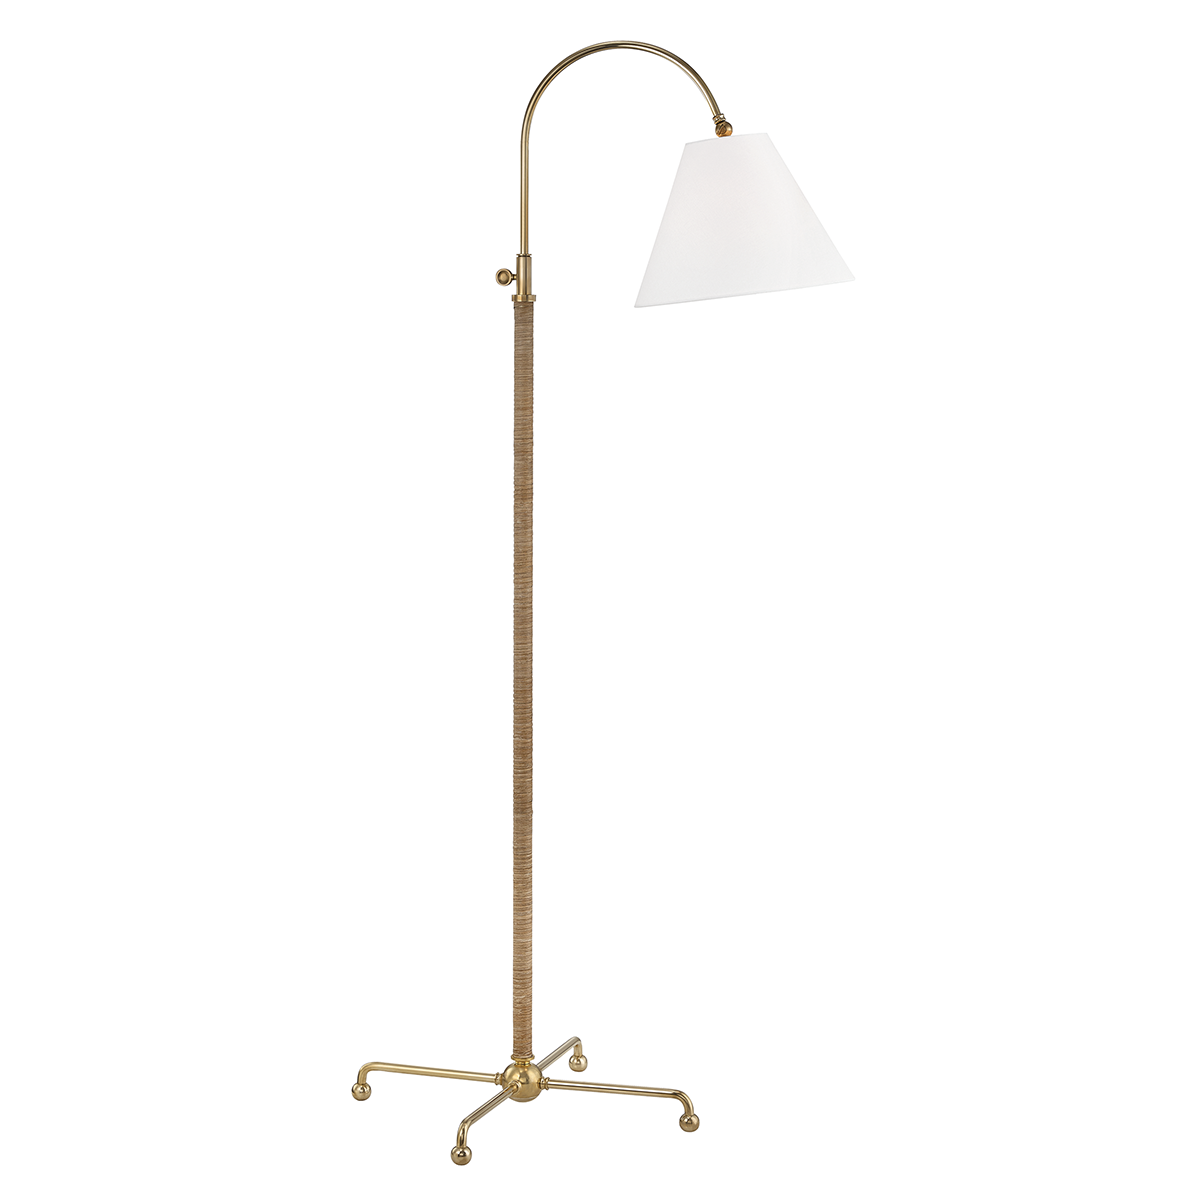 Hudson Valley Lighting Curves Floor Lamp with Rattan